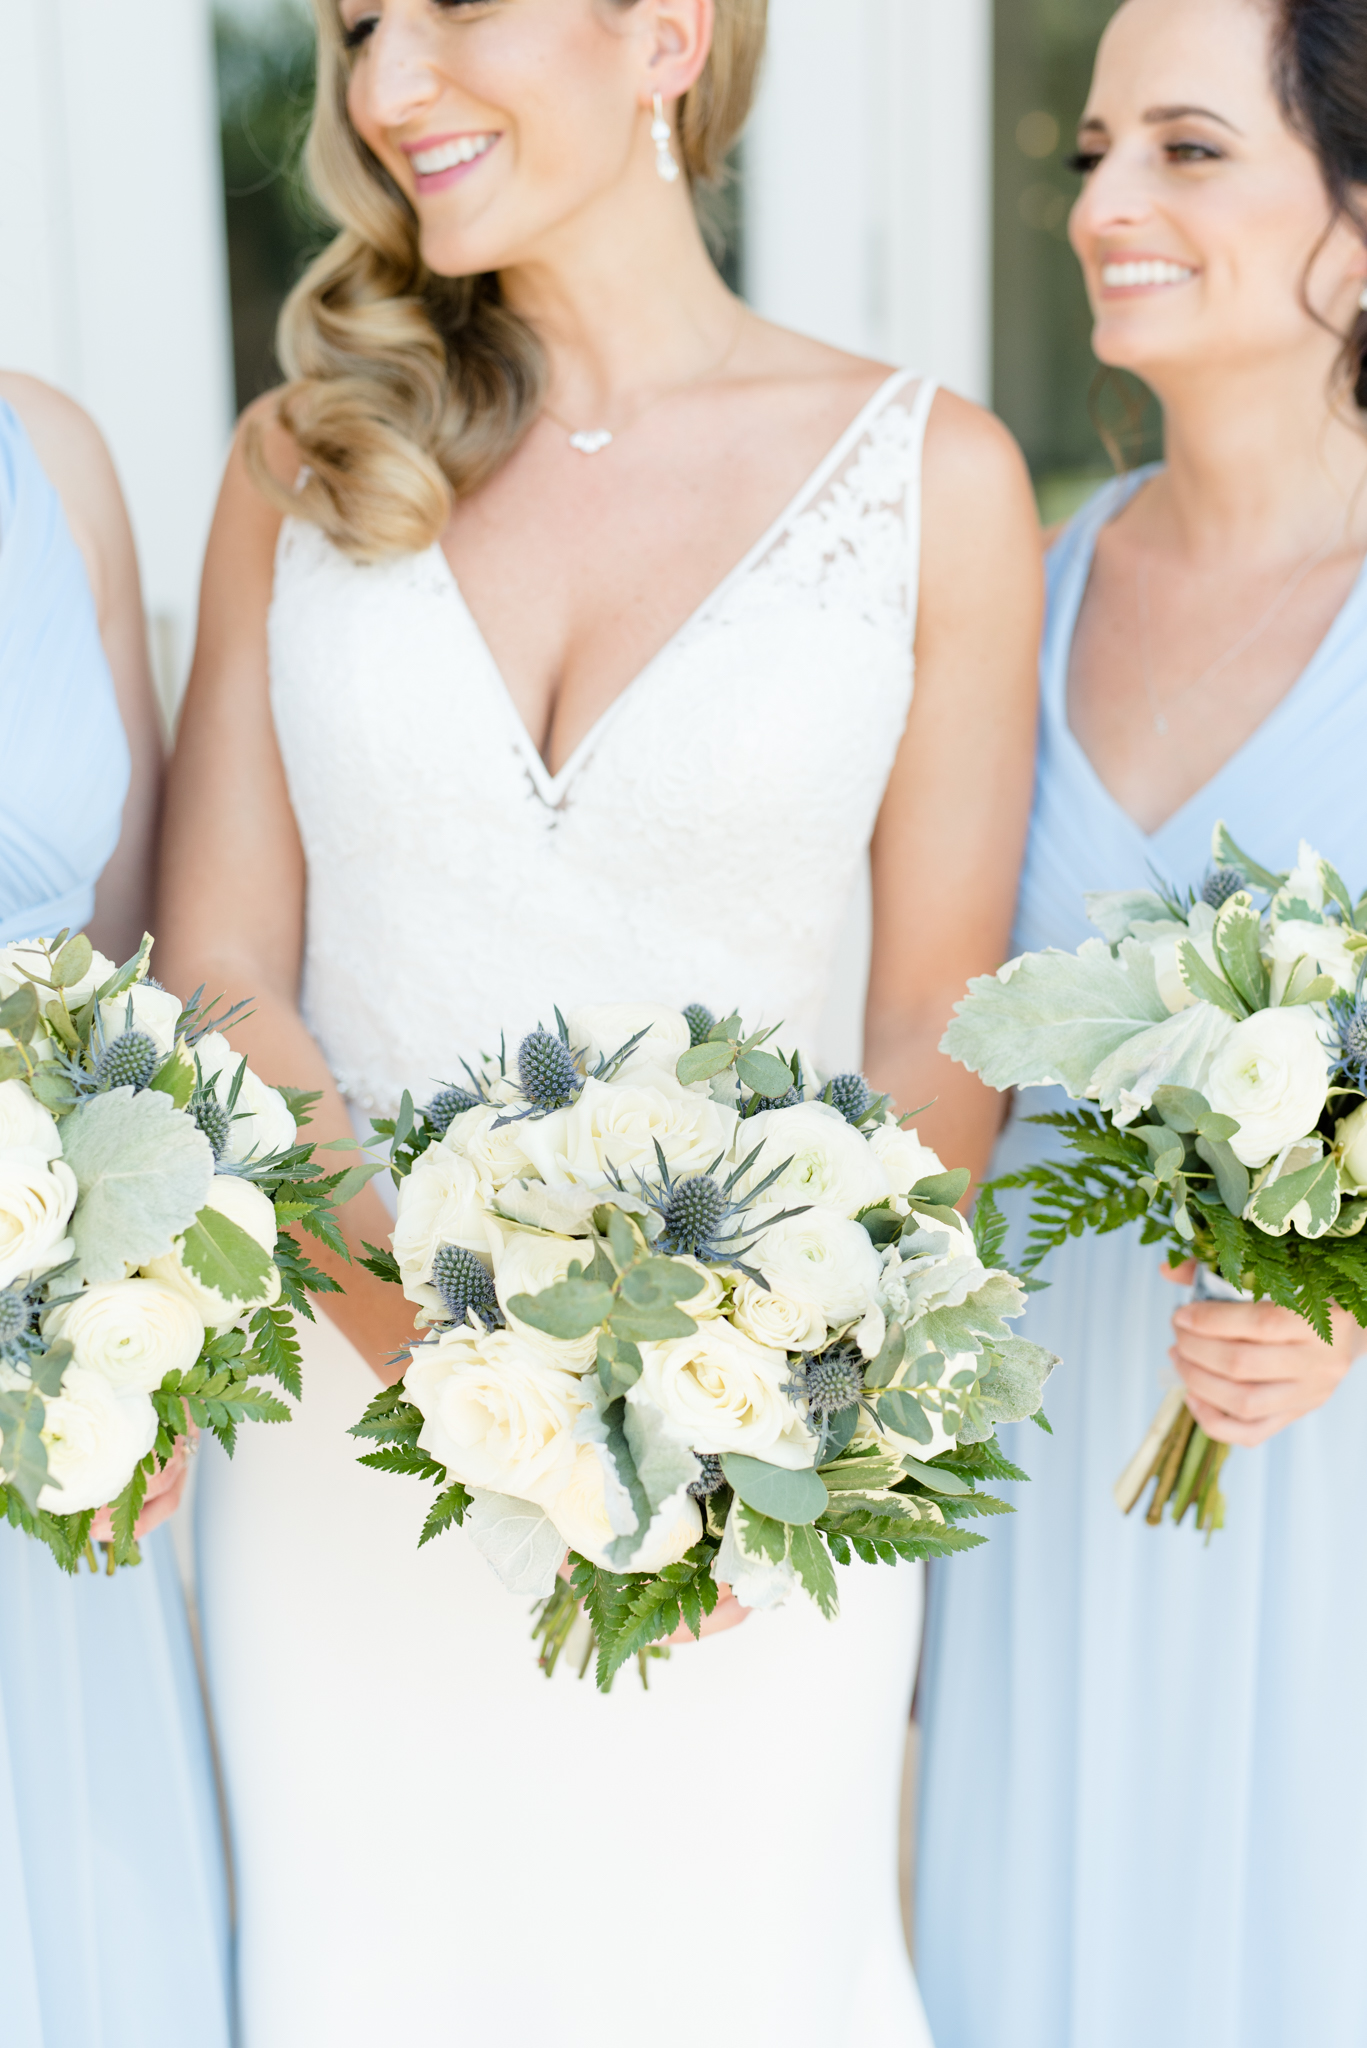 Closeup of bridal party flowers.